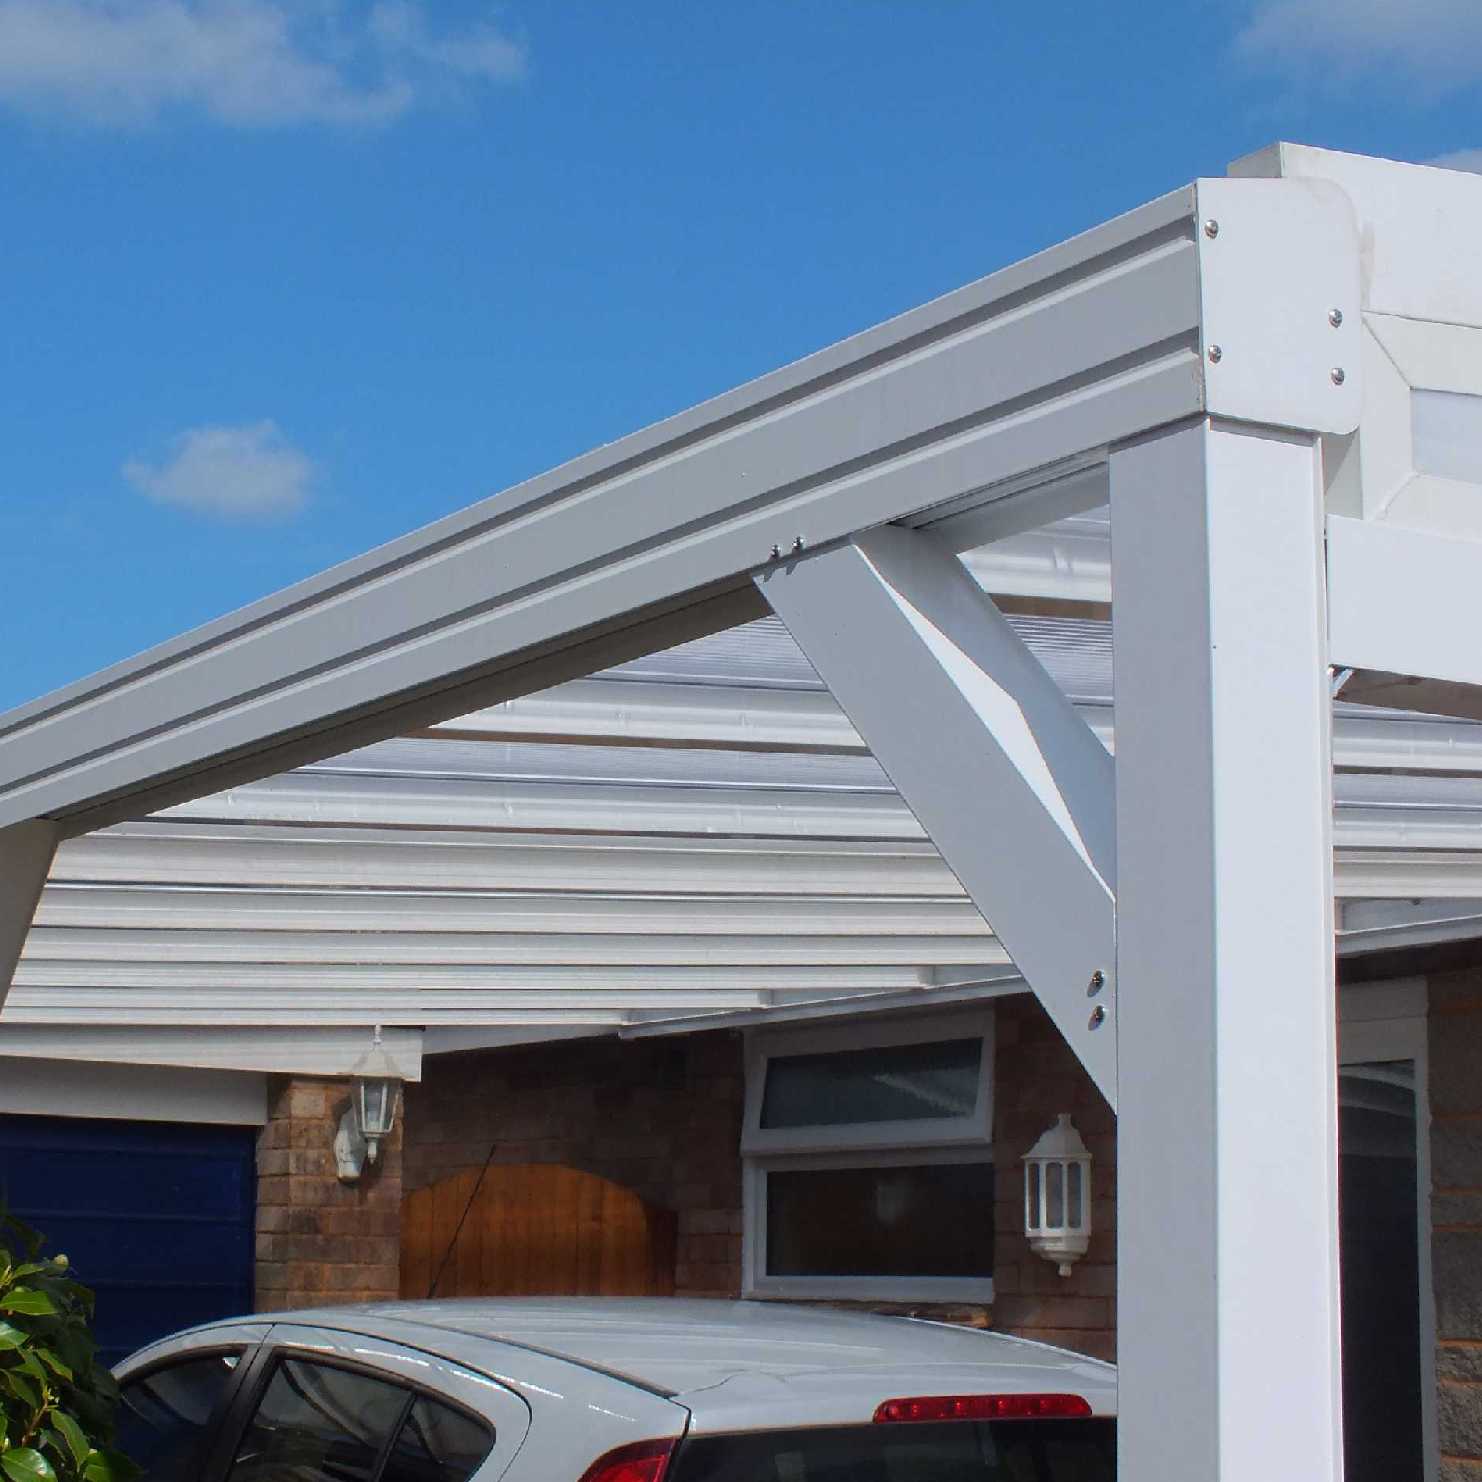 Buy Omega Smart Lean-To Canopy, White with 16mm Polycarbonate Glazing - 2.1m (W) x 2.5m (P), (2) Supporting Posts online today